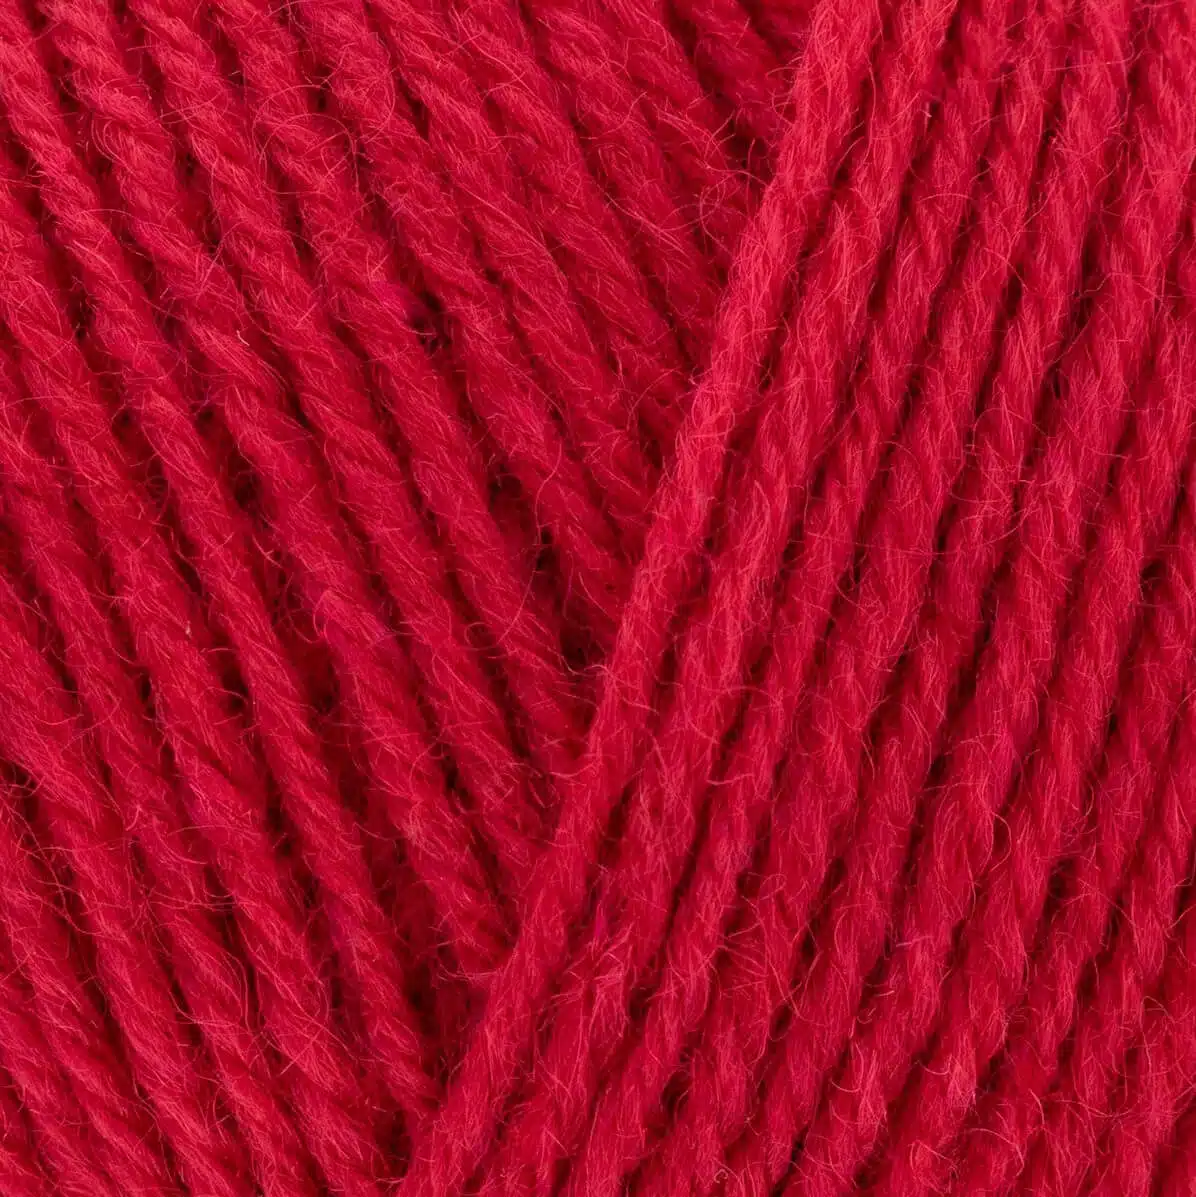 West Yorkshire Spinners Signature 4ply - Rouge 1000